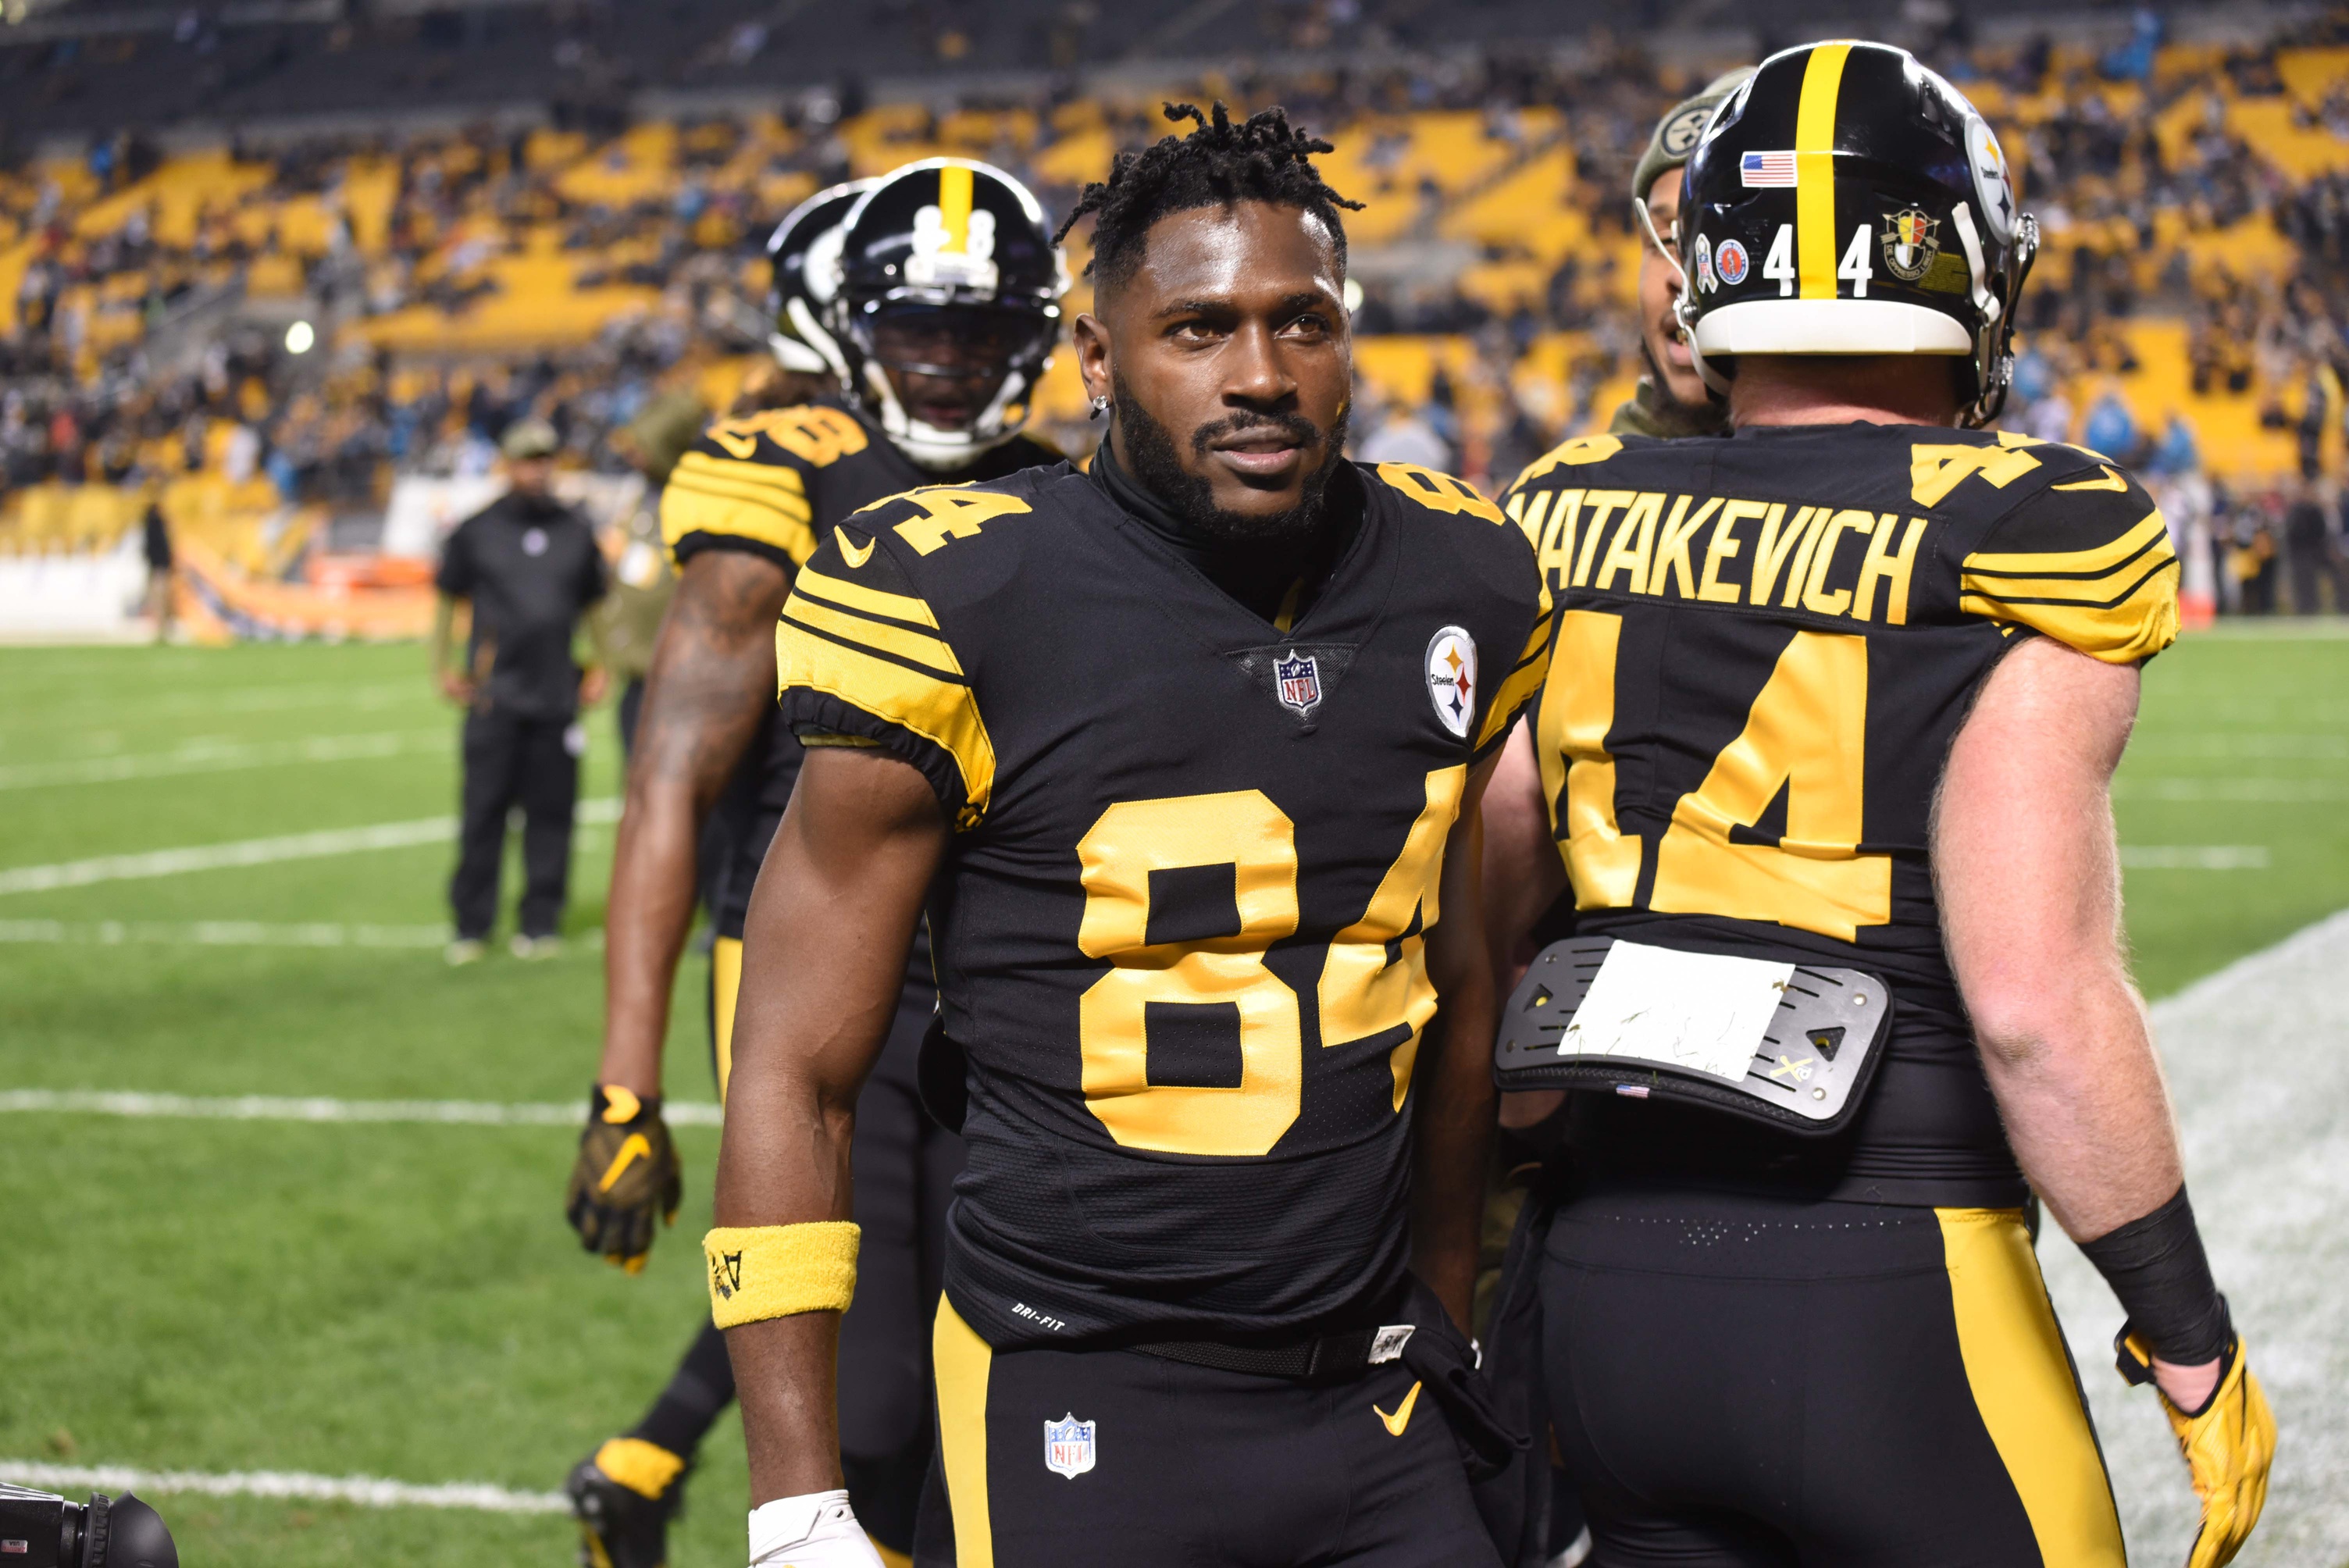 Antonio Brown says goodbye to Steelers fans, says it's time to move on